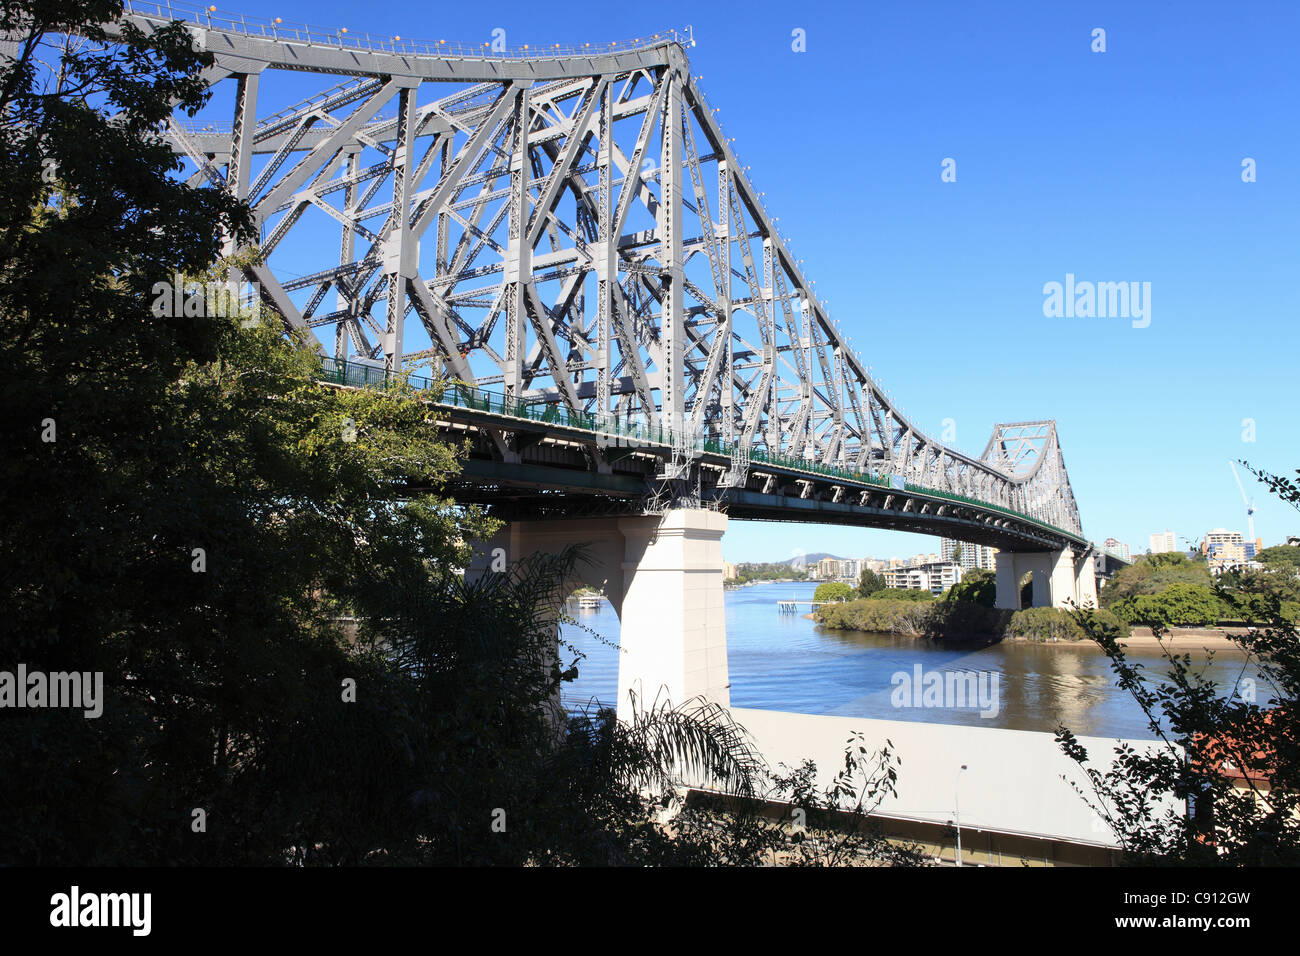 The Story Bridge is a cantilever bridge spanning the Brisbane River. Part of Bradfield Highway 15 it connects Fortitude Valley Stock Photo